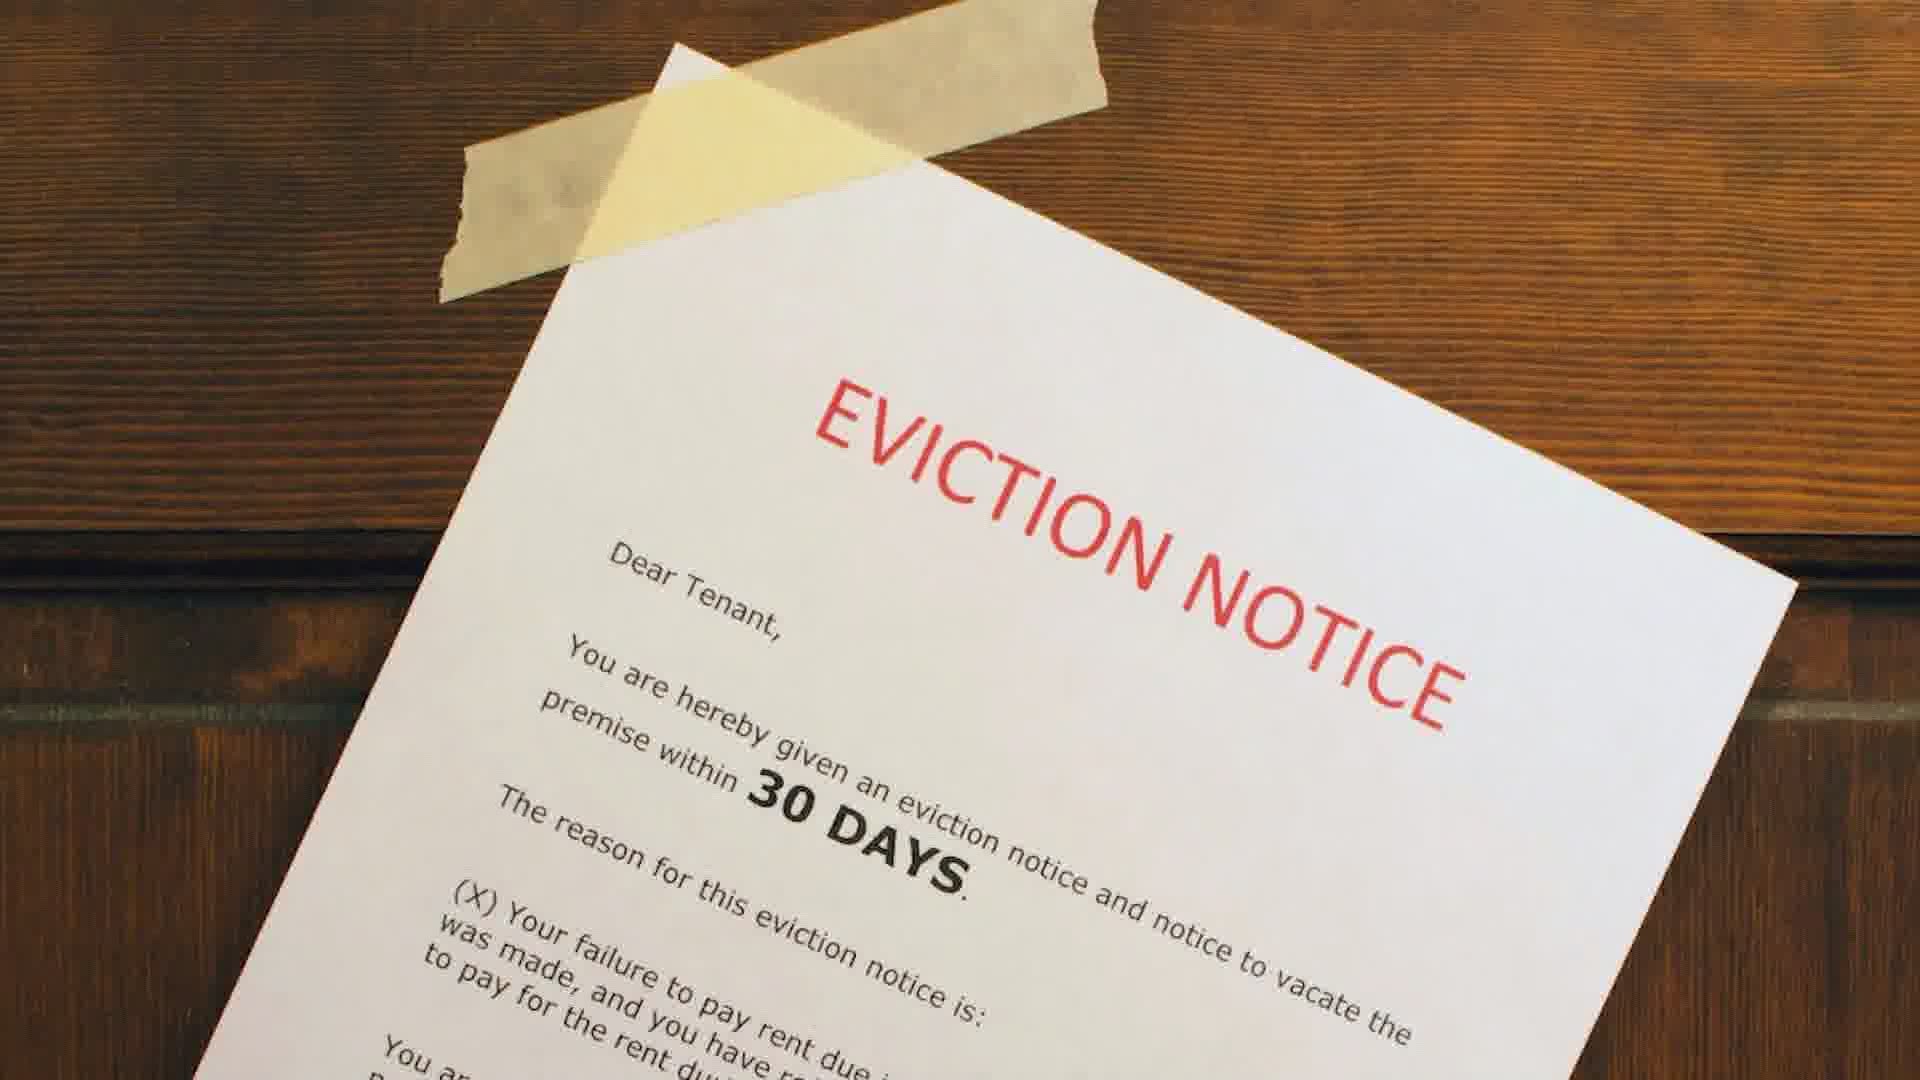 Federal memorandum protecting renters from eviction during the pandemic has been extended, but there are loopholes allowing tenants to be kicked out.